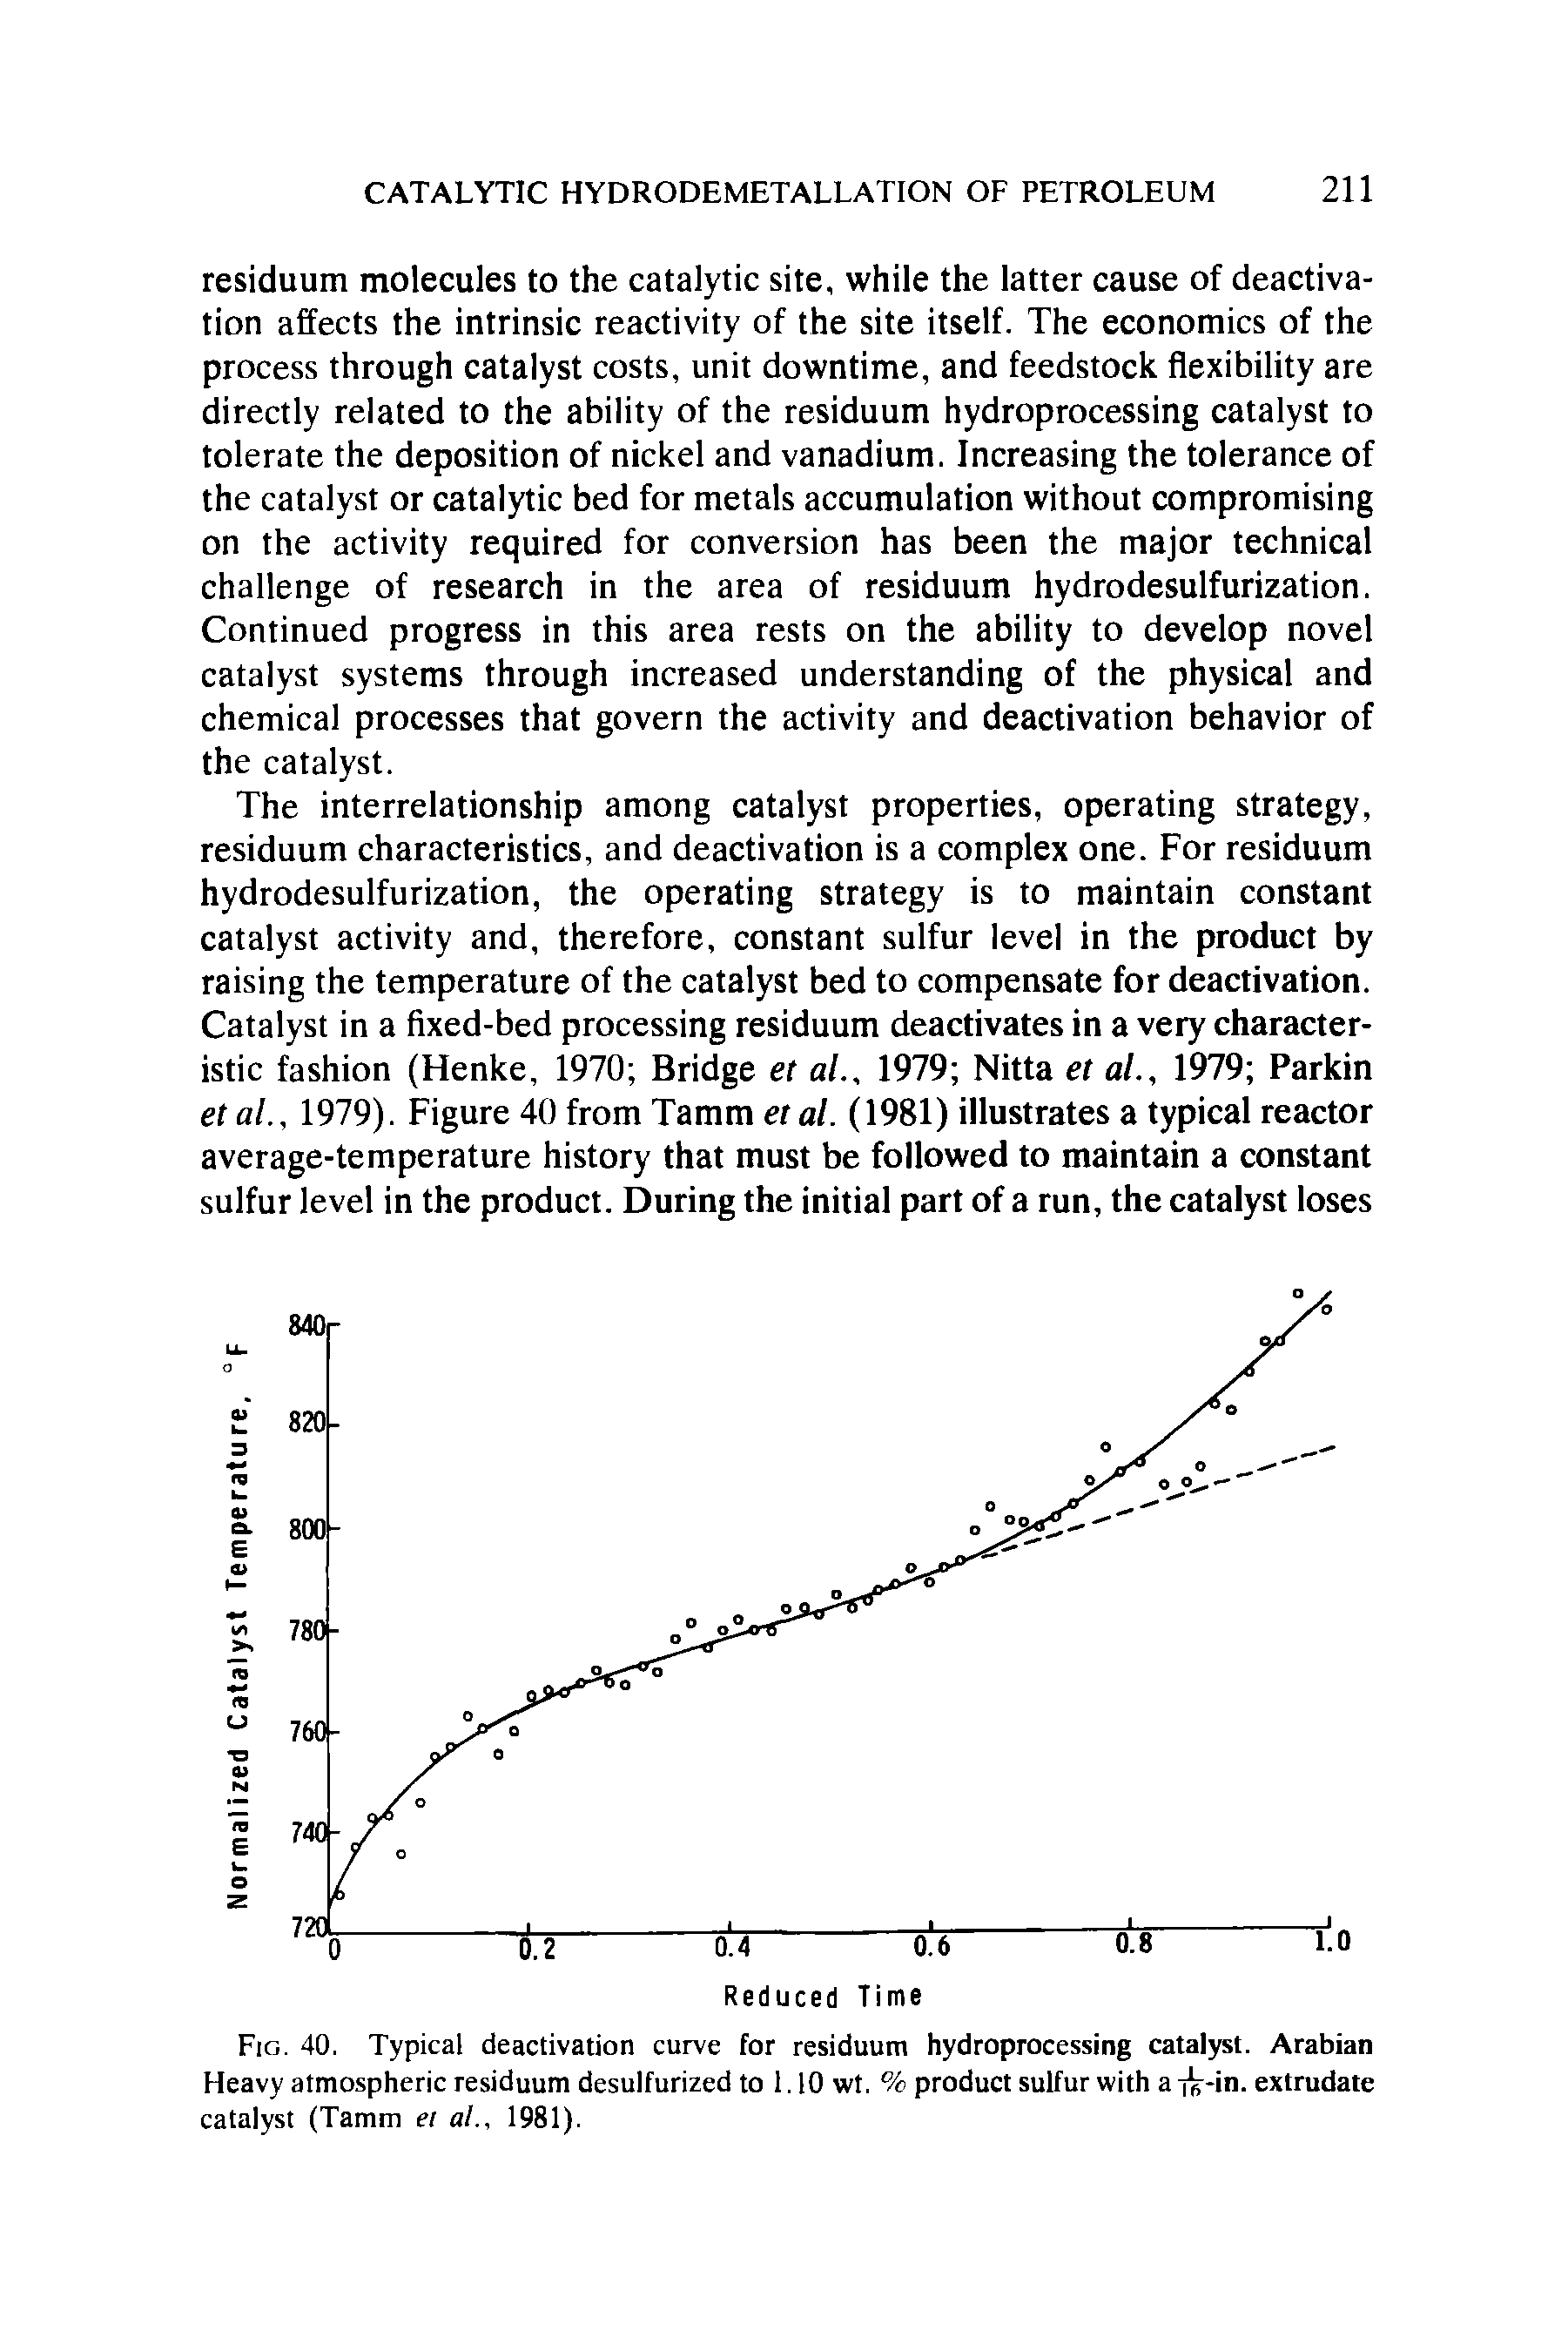 Fig. 40. Typical deactivation curve for residuum hydroprocessing catalyst. Arabian Heavy atmospheric residuum desulfurized to 1.10 wt. % product sulfur with a iV-in. extrudate catalyst (Tamm ei al., 1981).